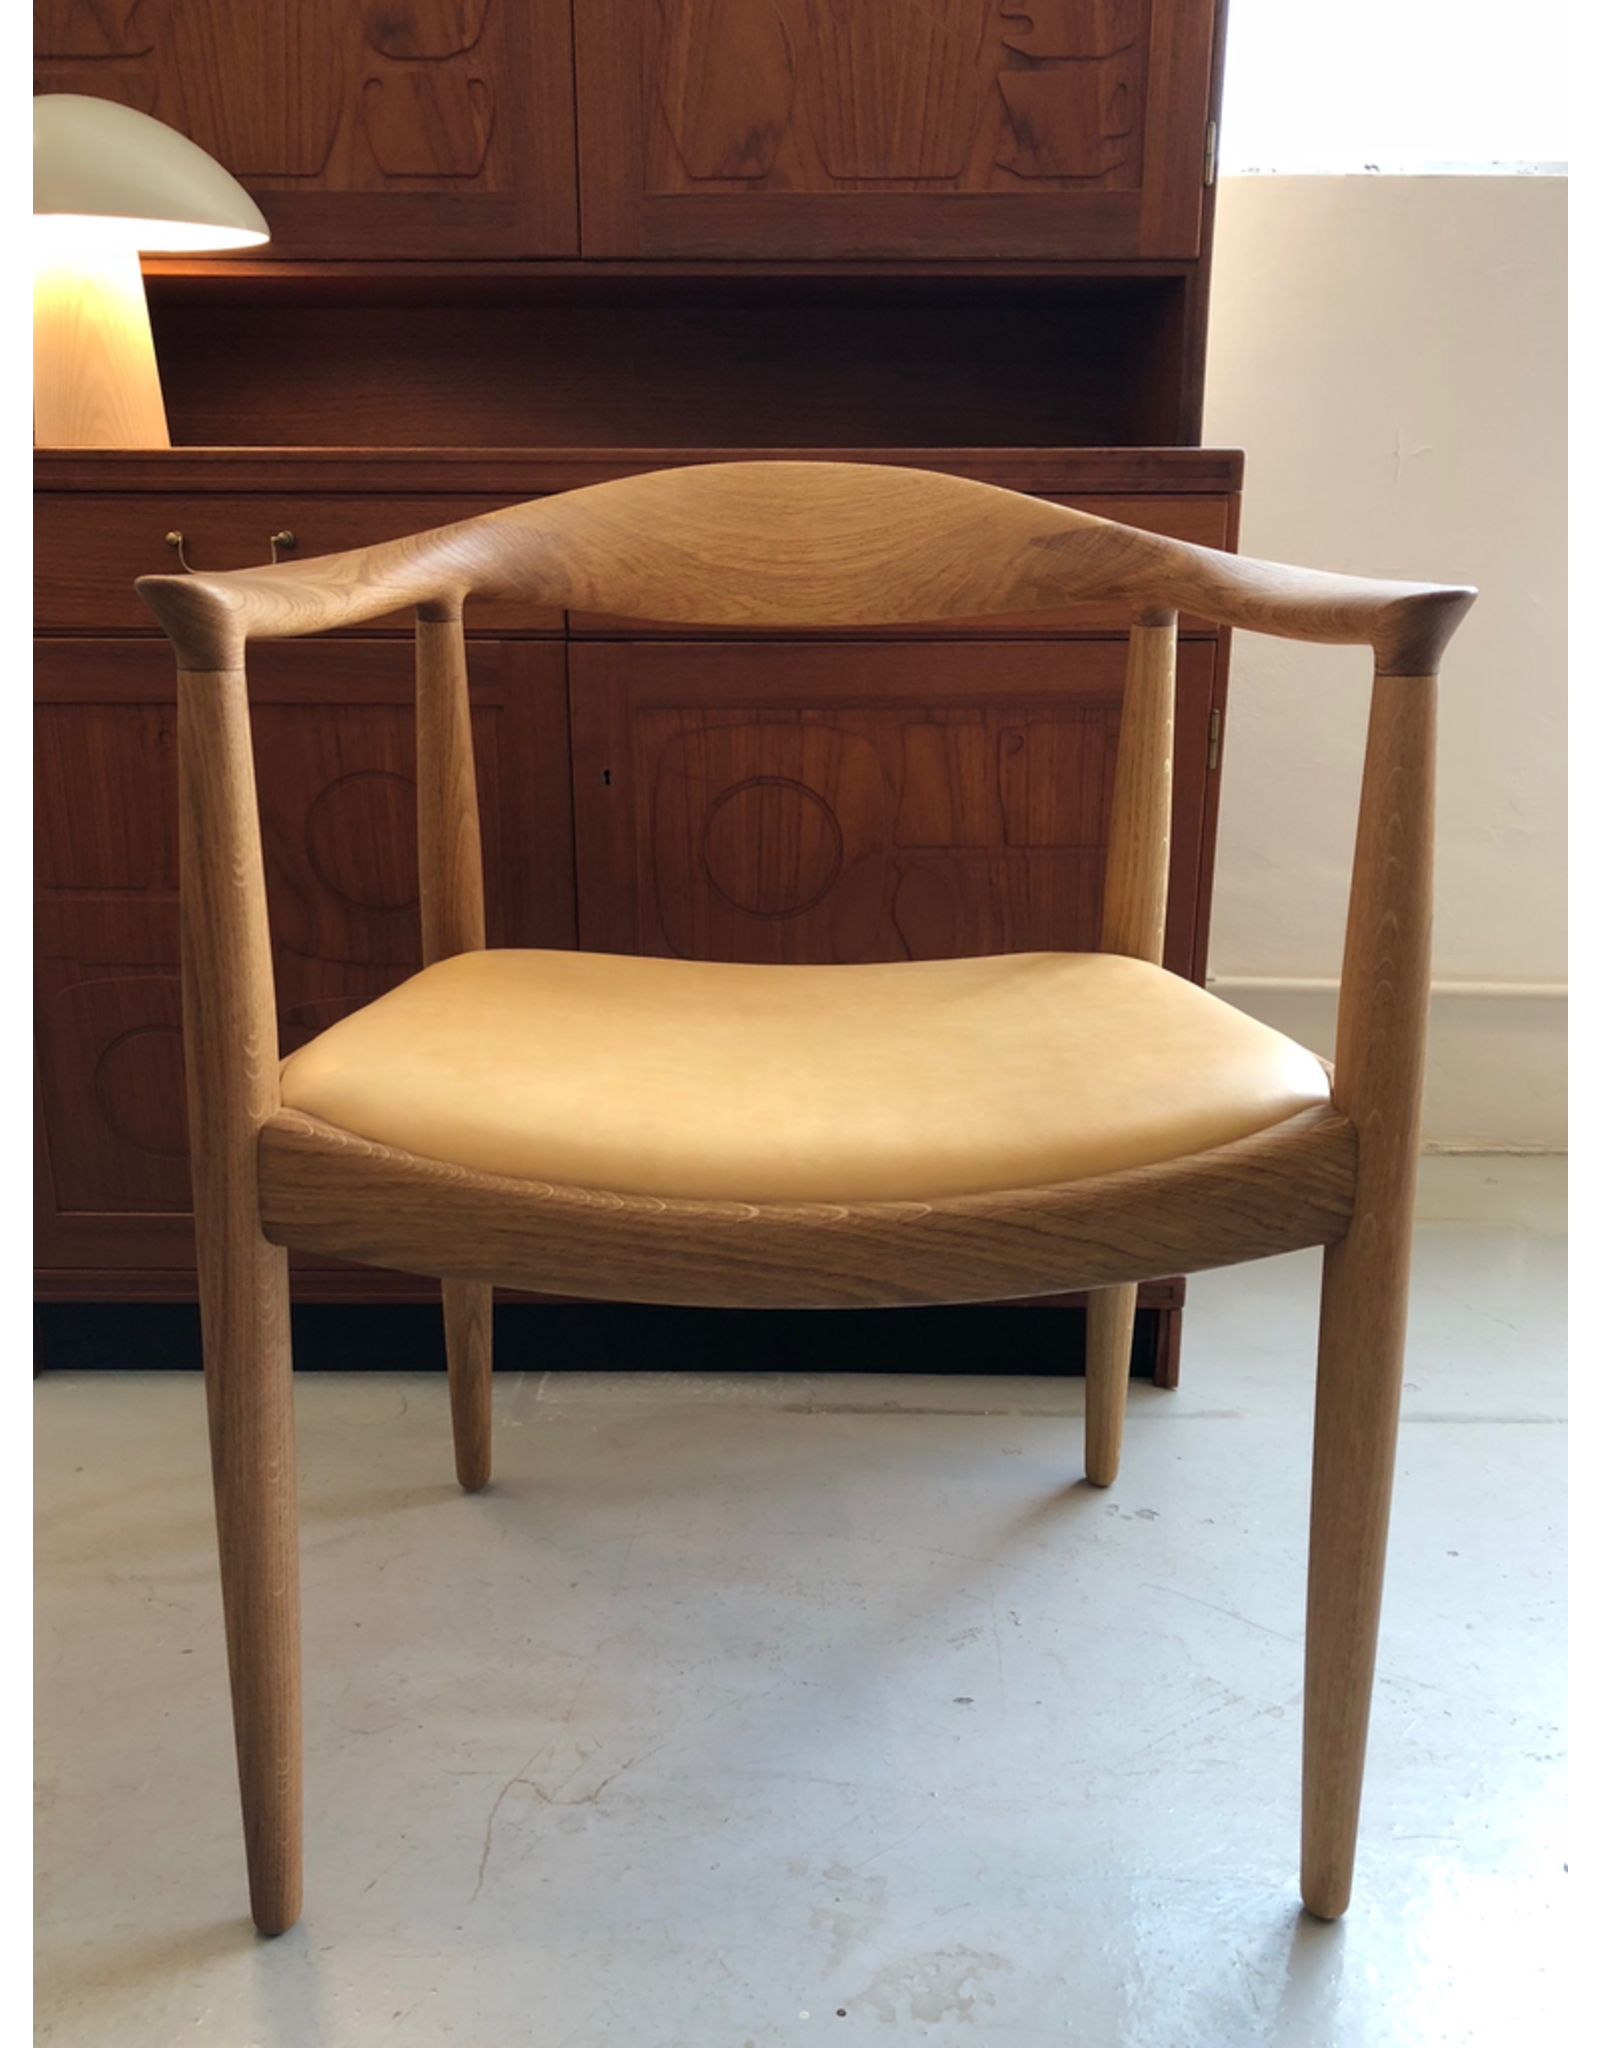 (SHOWROOM ITEM) PP503 THE CHAIR